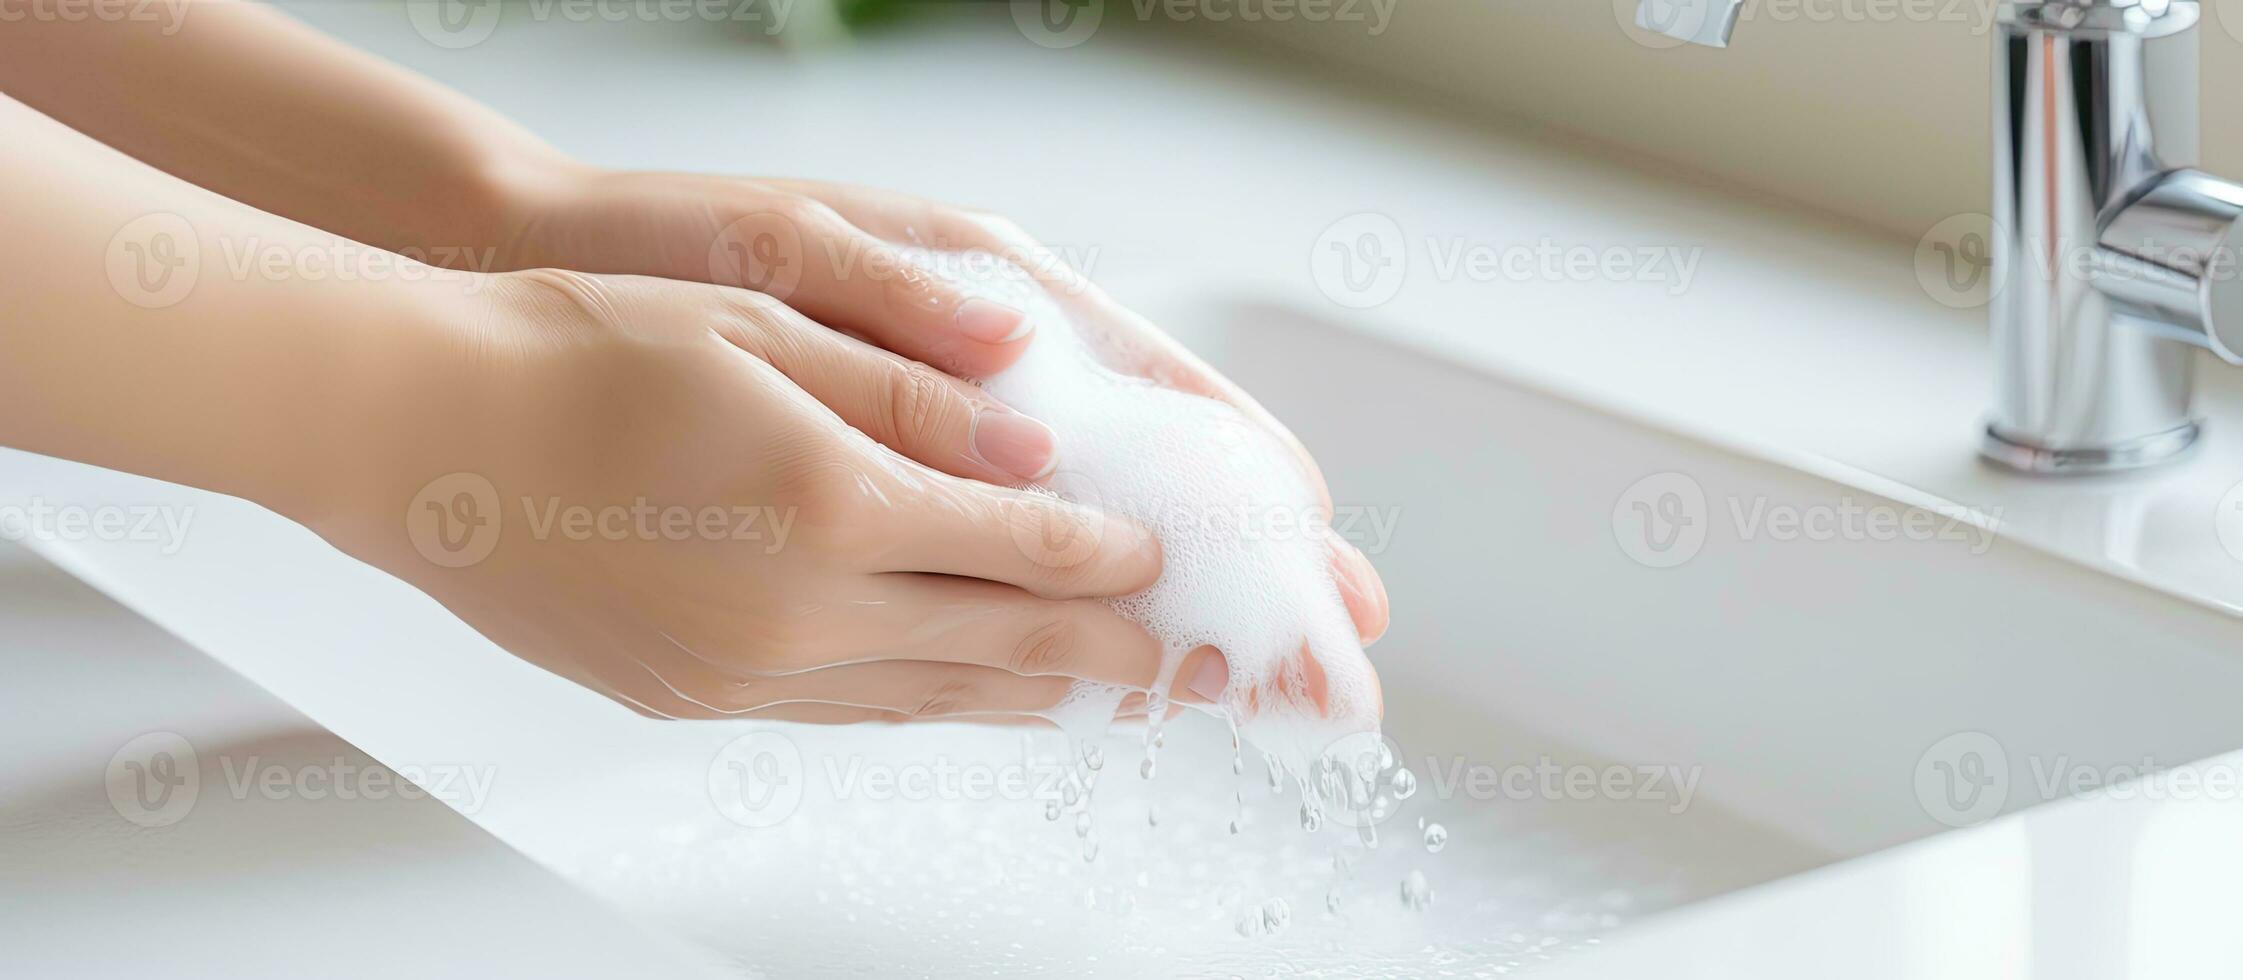 Asian woman hand washing in Bathroom at home Covid 19 pandemic care photo